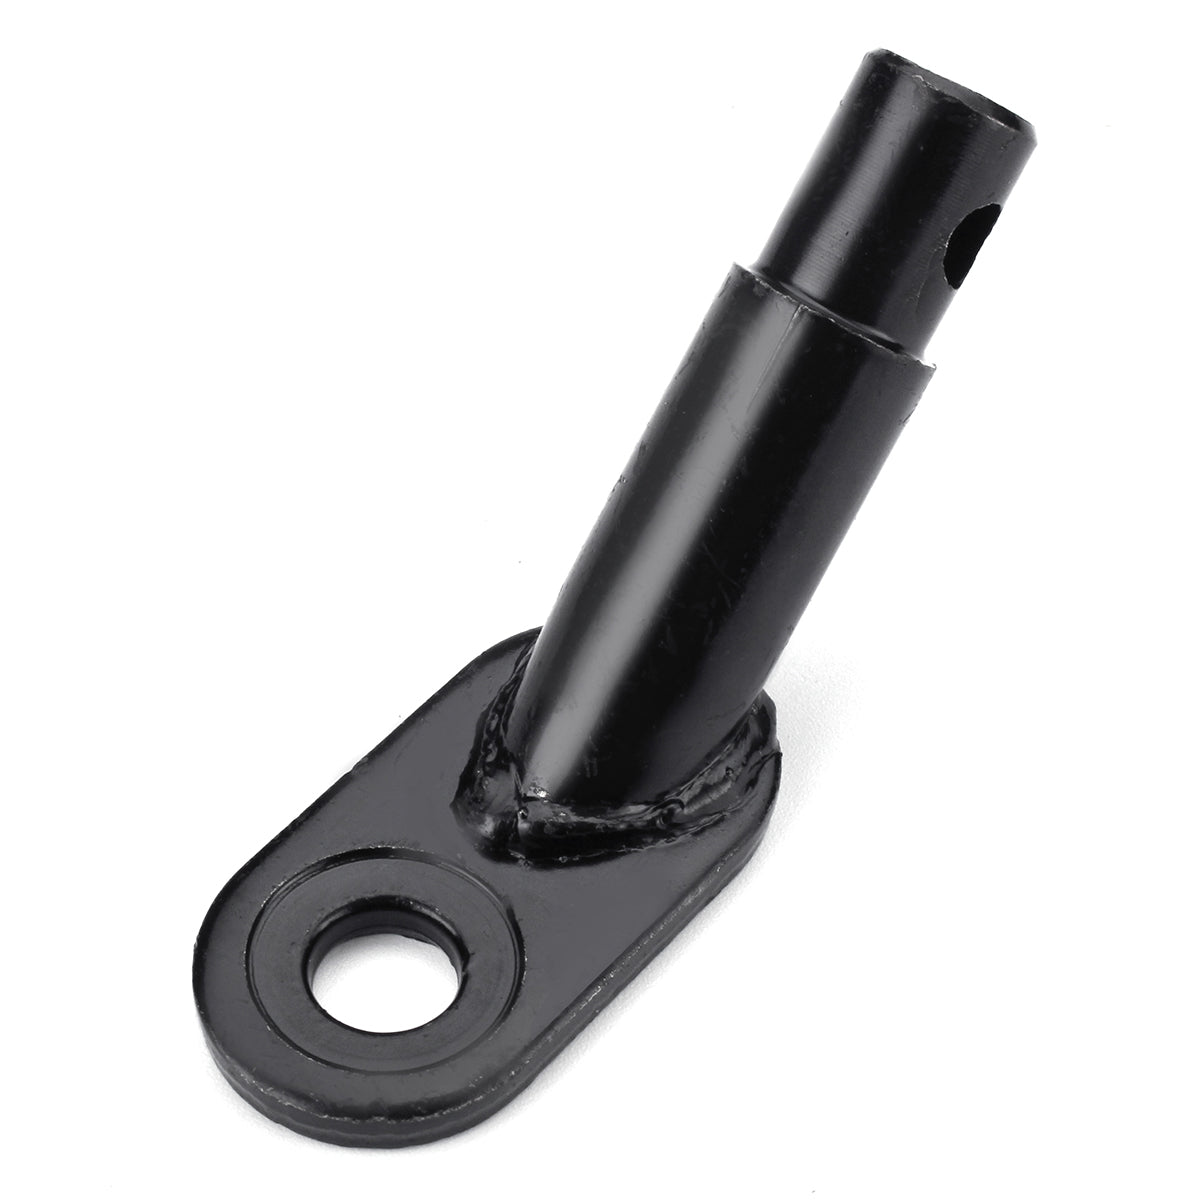 Black Steel Bicycle Trailer Hitch Mount Adapter Replacement Axle Bike Accessory